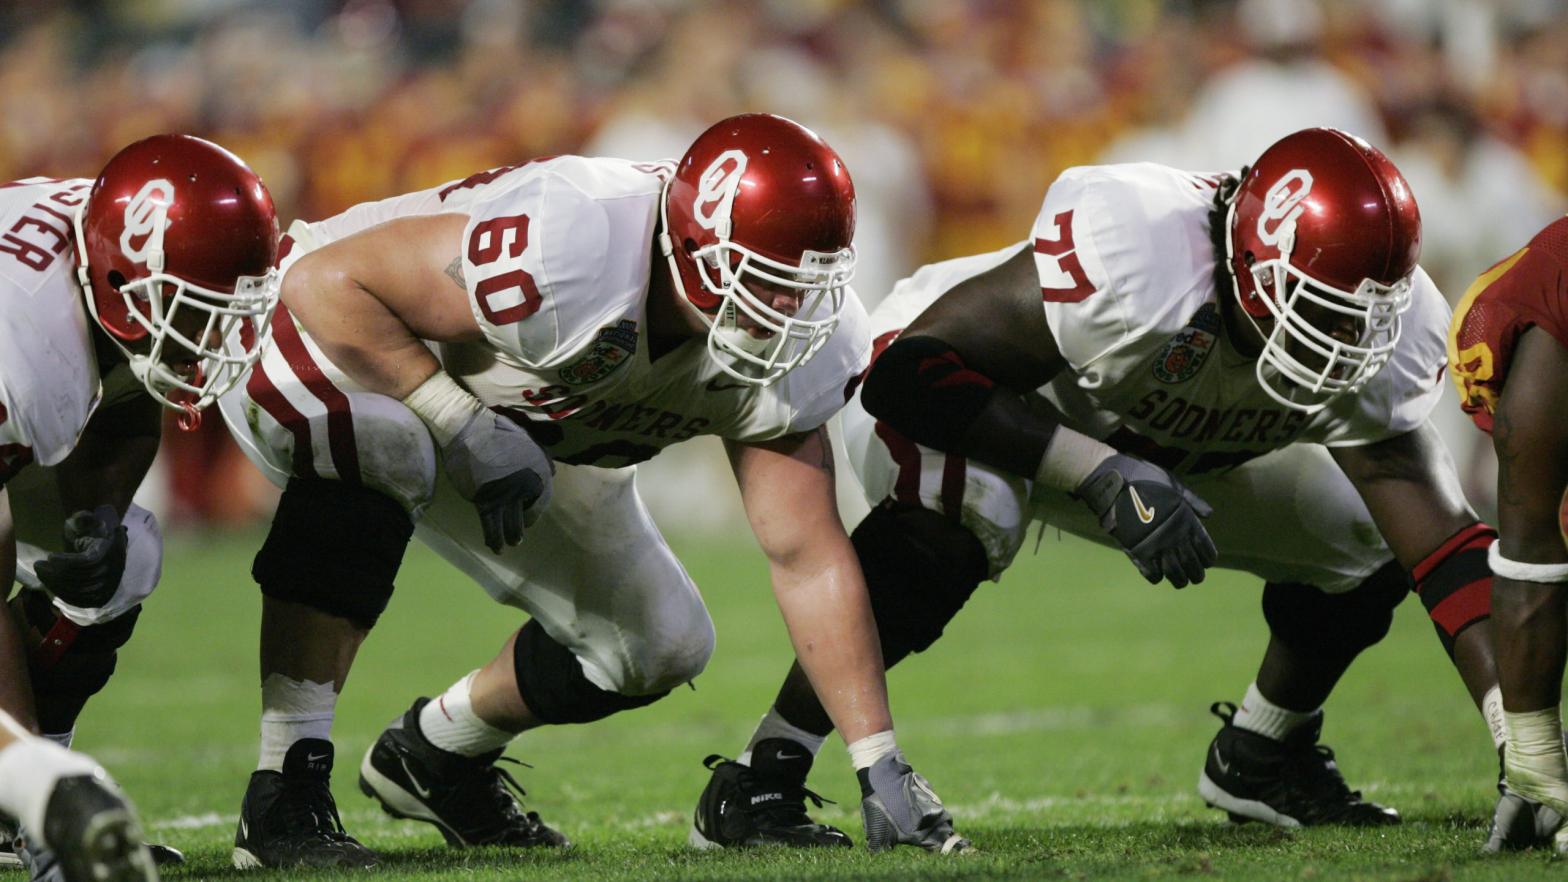 Members of the Oklahoma Sooners line up against the USC Trojans in the 2005 FedEx Orange Bowl National Championship on January 4, 2005 at Pro Player Stadium in Miami, Florida (Photo: Brian Bahr, Getty Images)